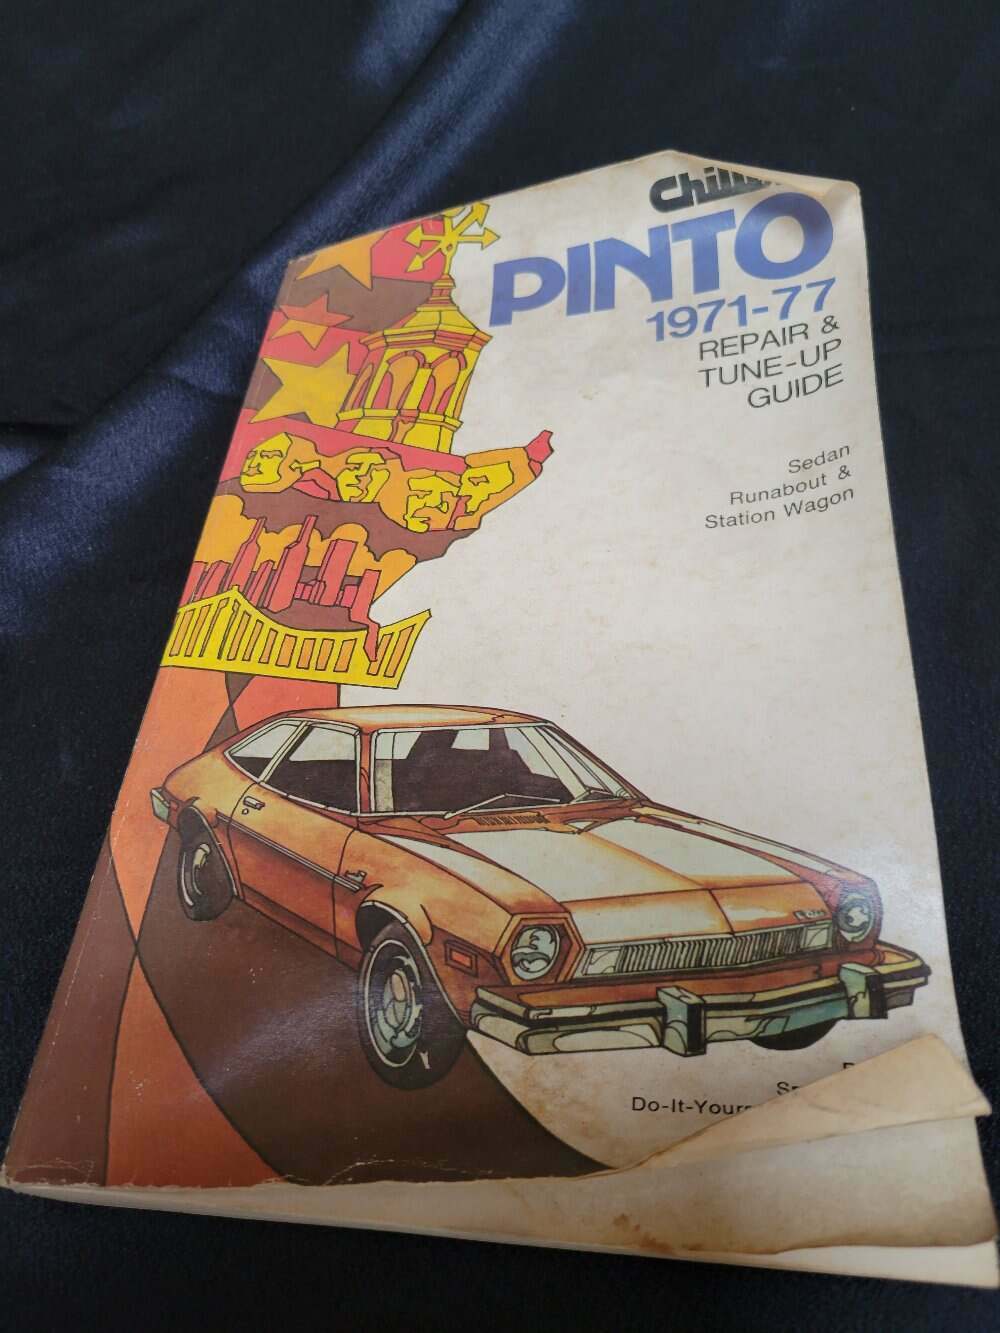 Vintage CHILTON'S (FORD) PINTO 1971-77 REPAIR TUNE-UP GUIDE